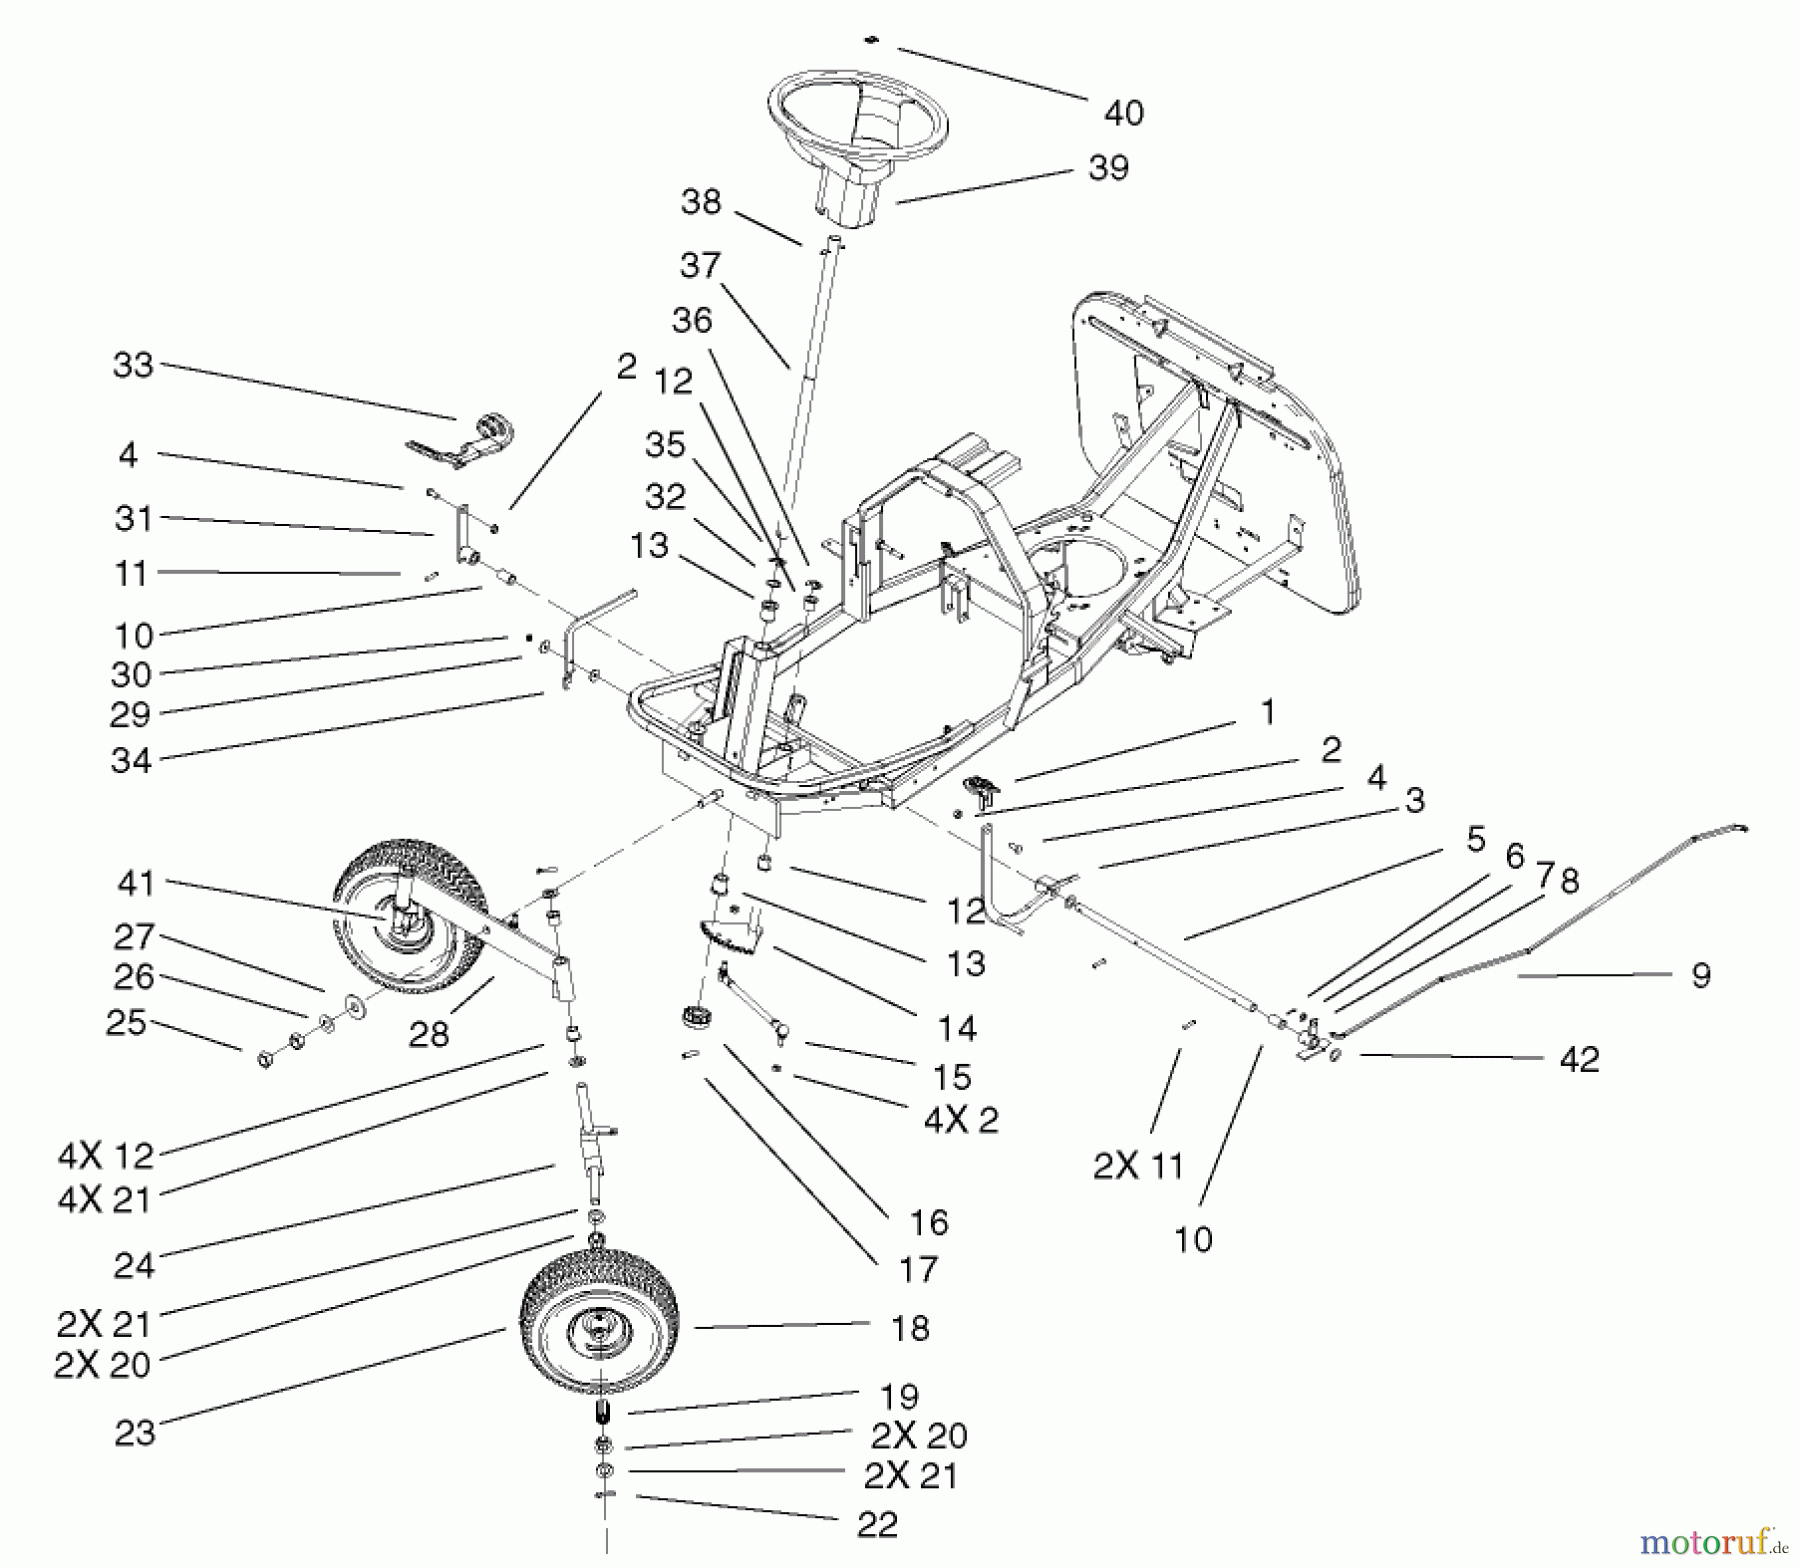  Toro Neu Mowers, Rear-Engine Rider 70184 (13-32H) - Toro 13-32H Rear Engine Rider, 2002 (220000001-220999999) FRONT AXLE AND STEERING ASSEMBLY